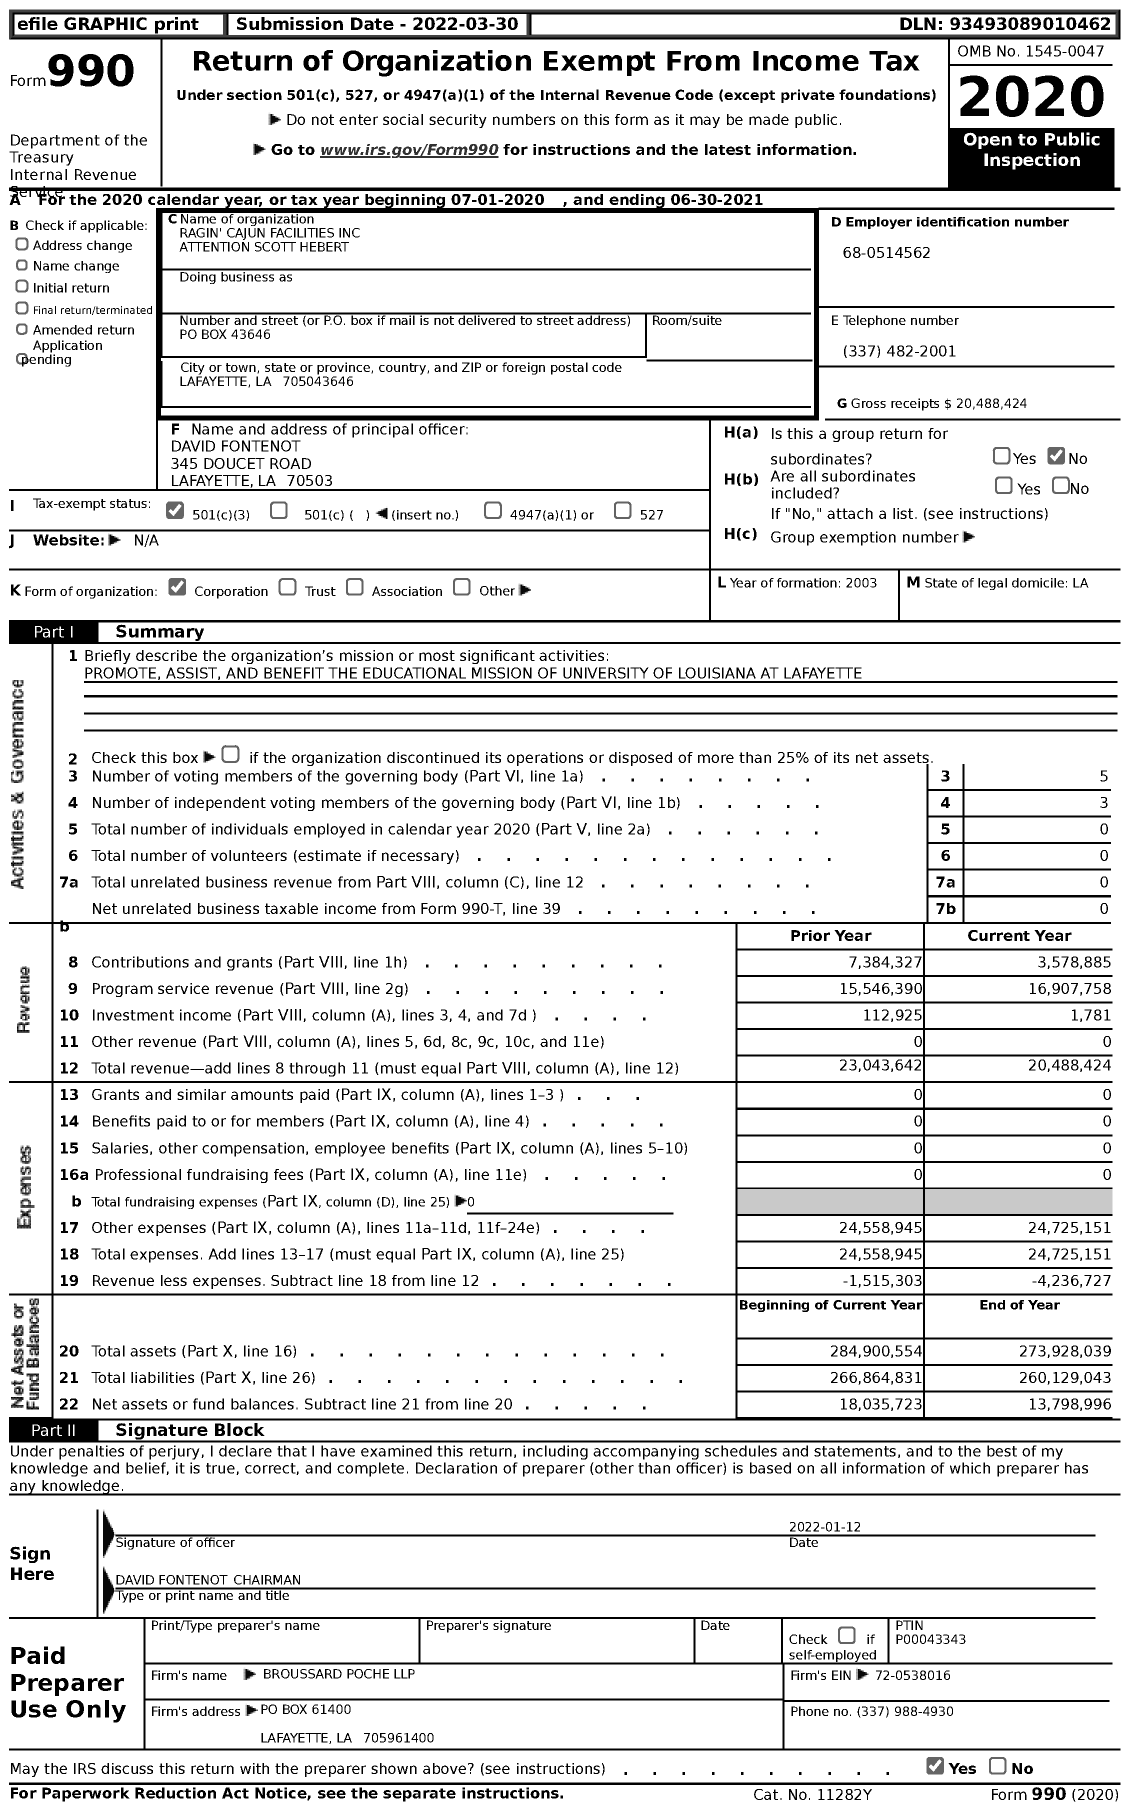 Image of first page of 2020 Form 990 for Ragin' Cajun Facilities Attention Scott Hebert